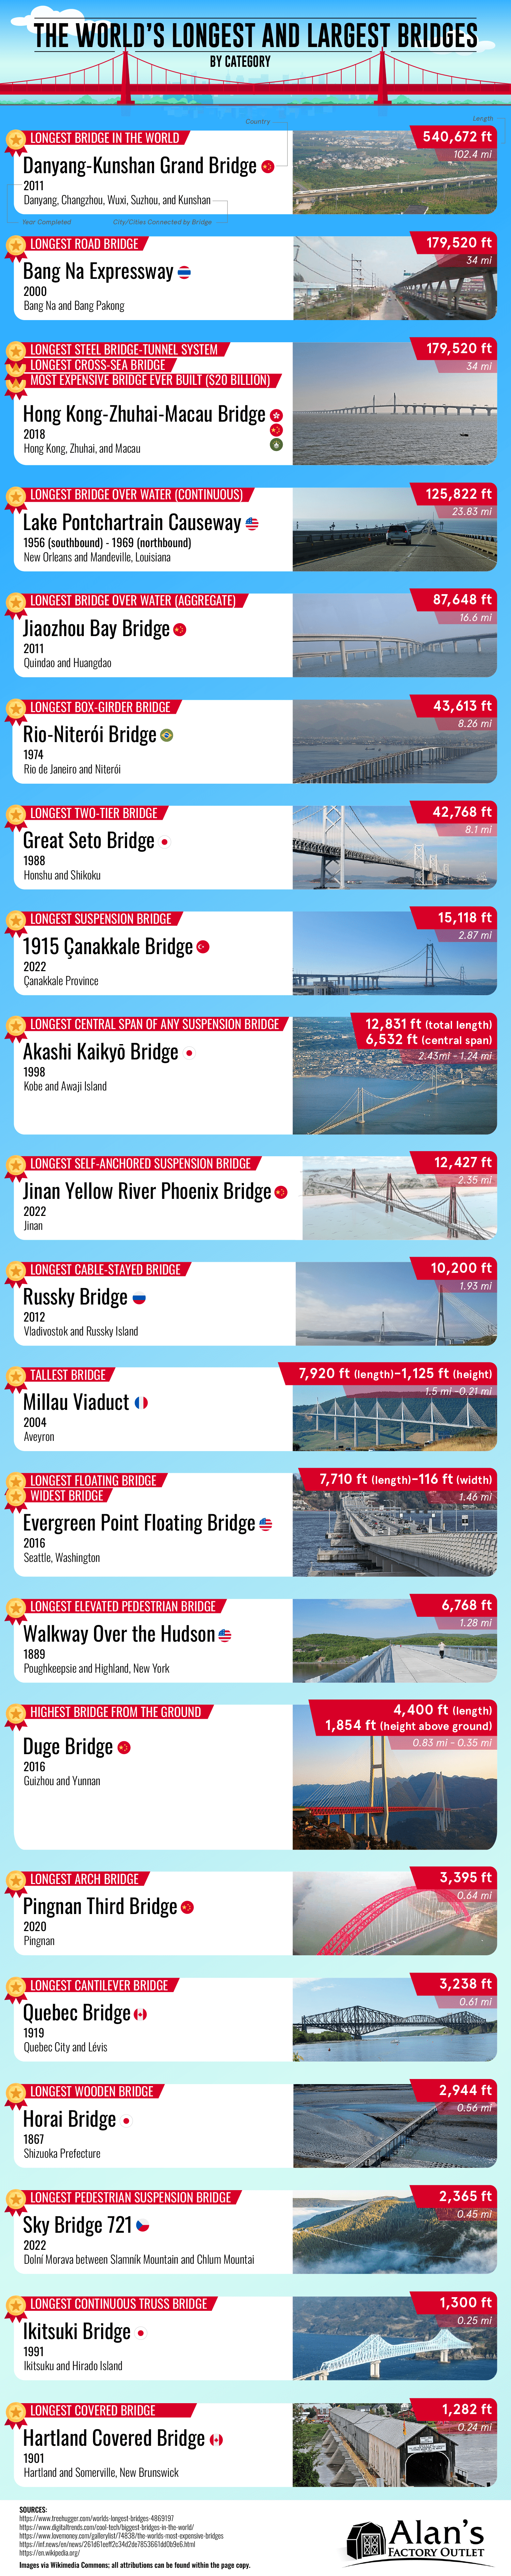 World’s Longest and Largest Bridges by Category